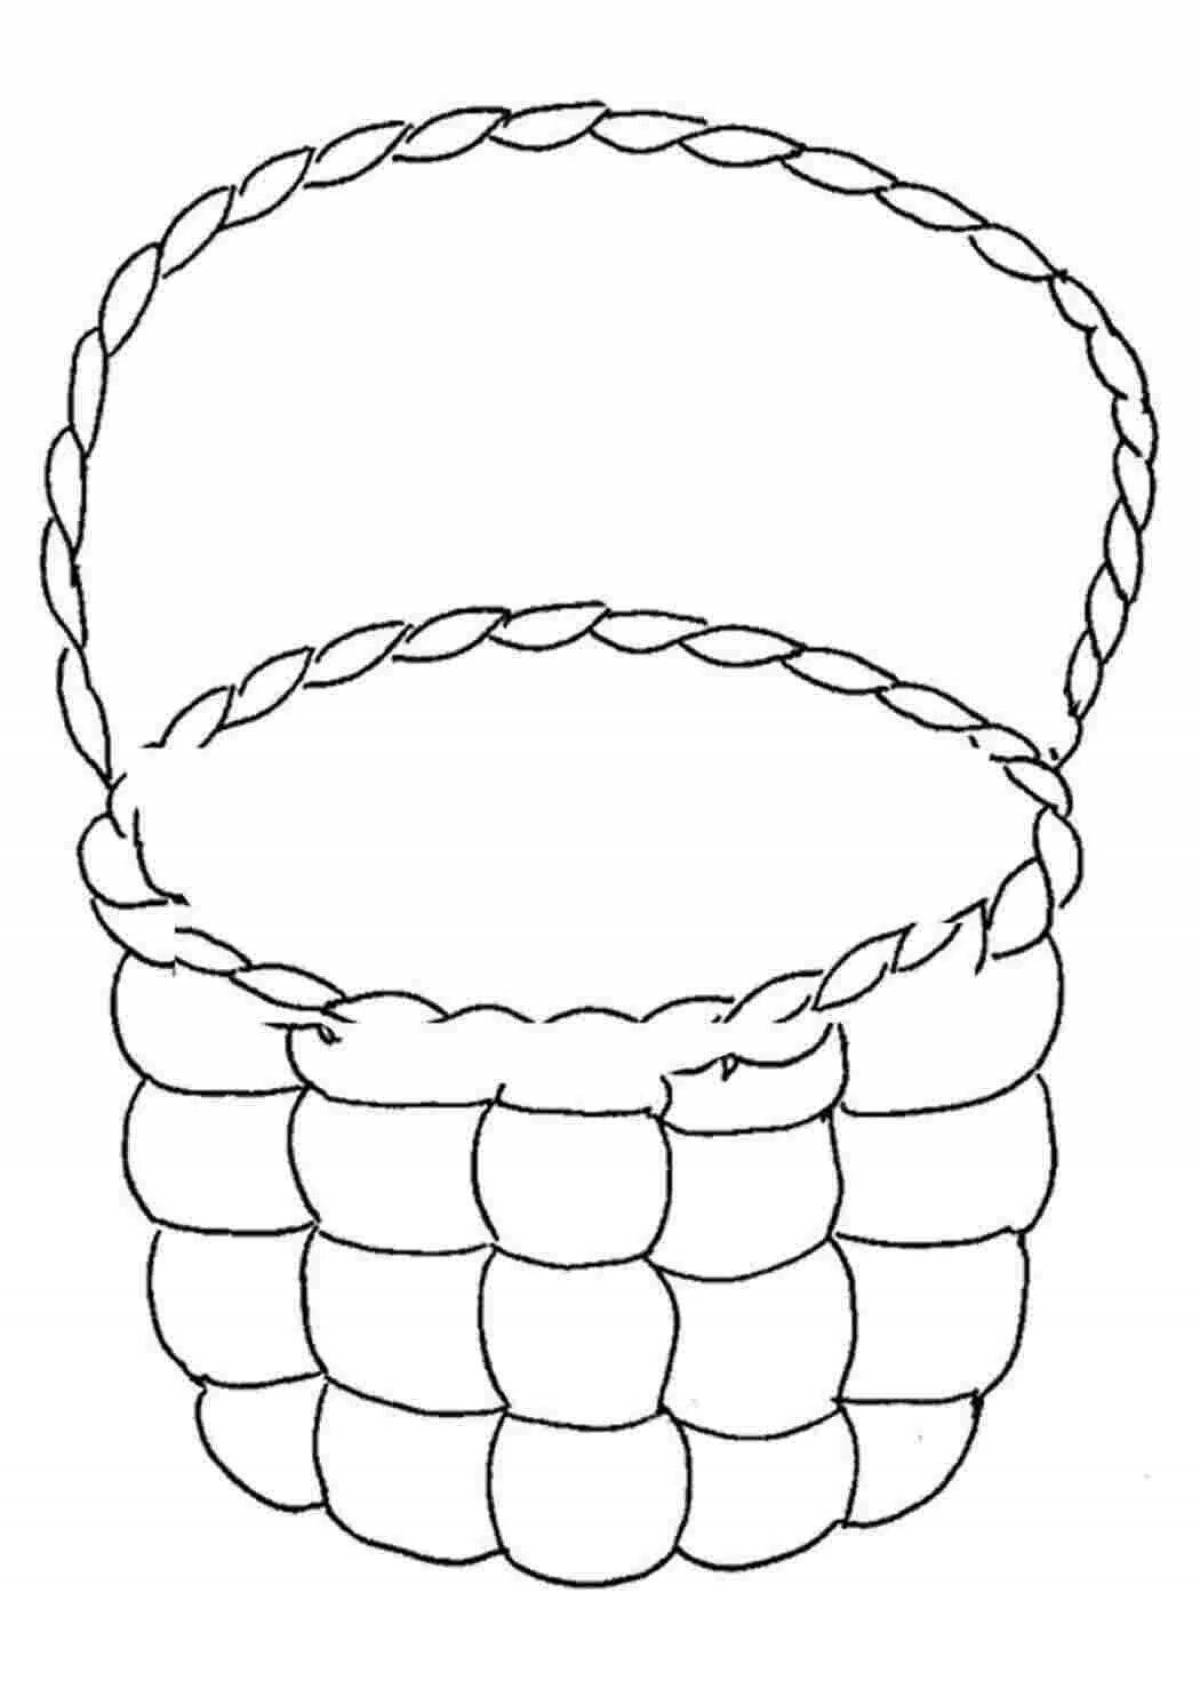 Amazing empty basket coloring page for kids